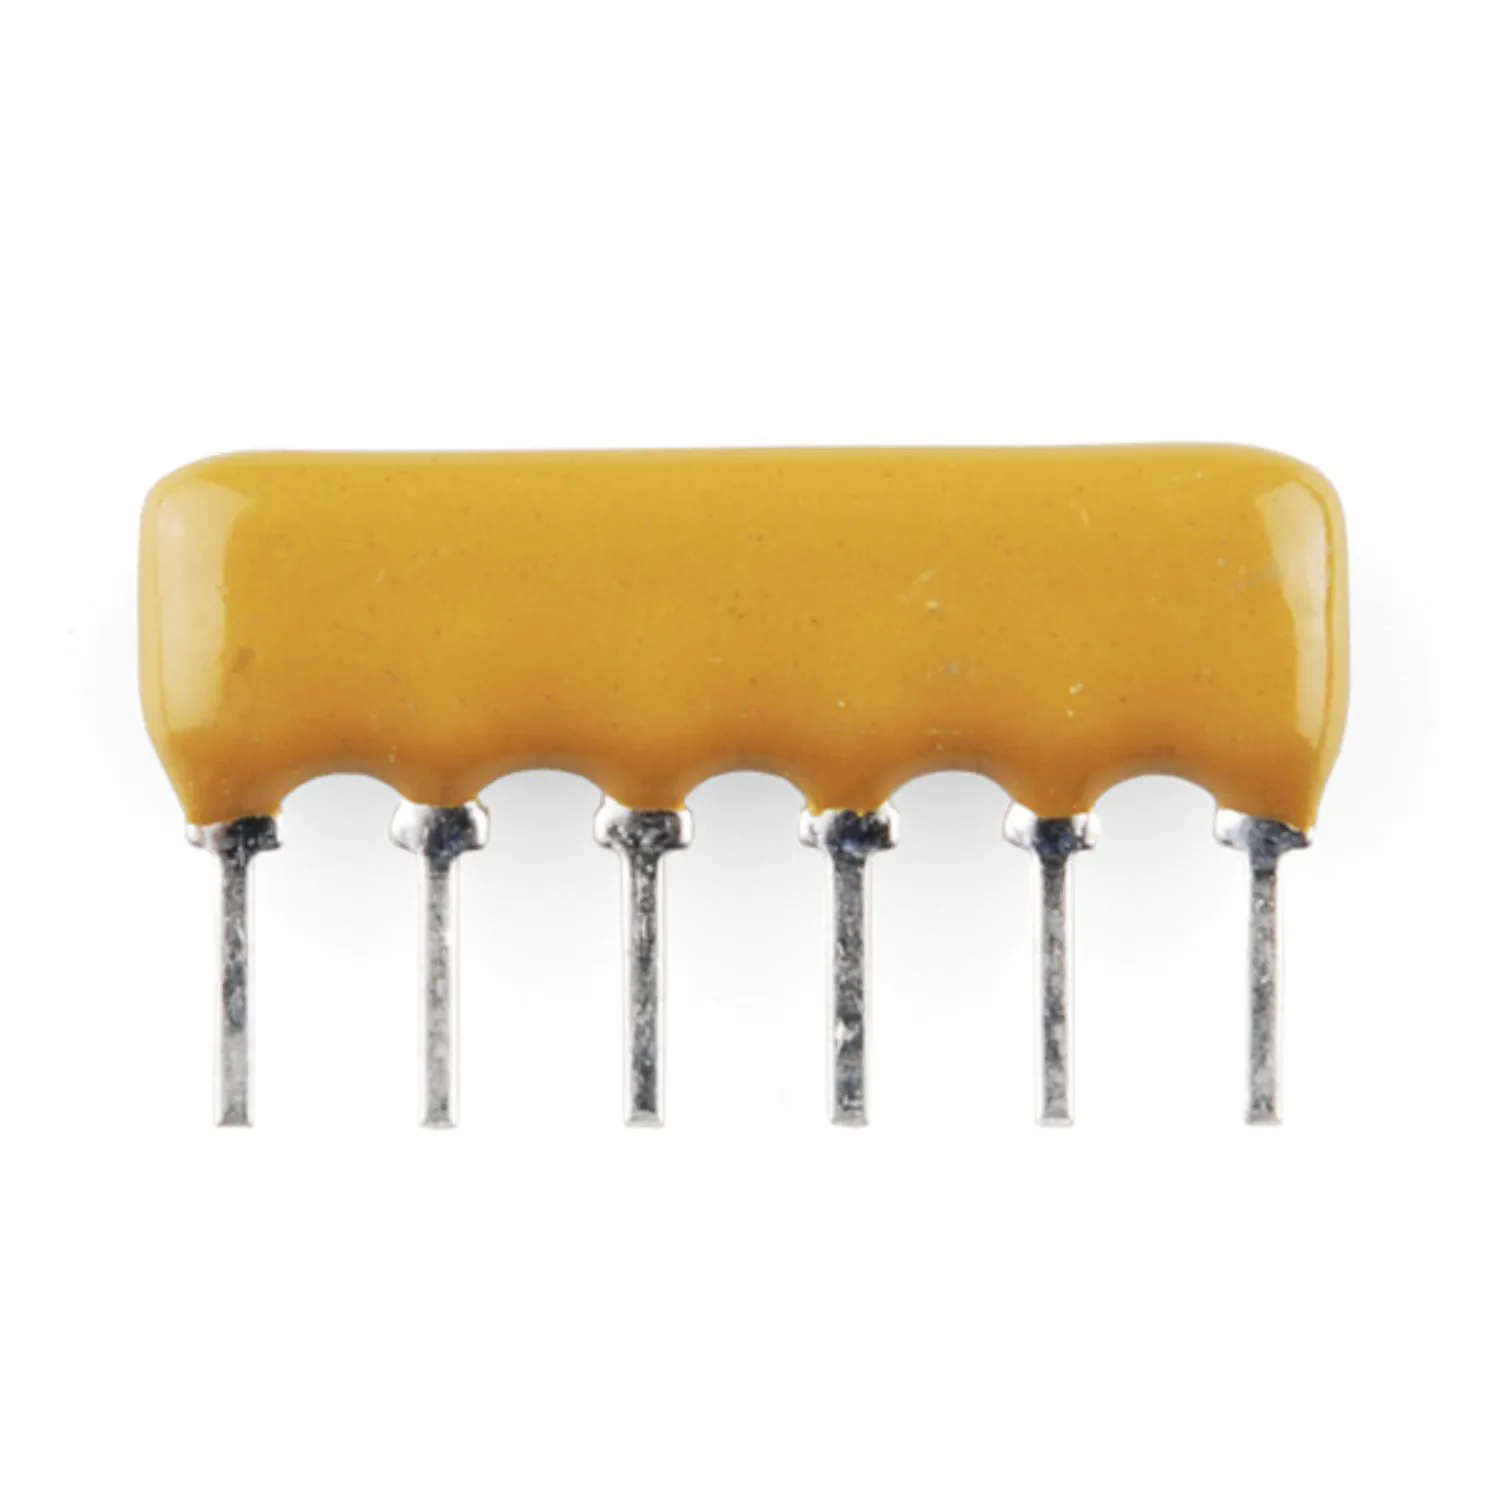 Photo of Resistor Network - 330 Ohm (6-pin bussed)